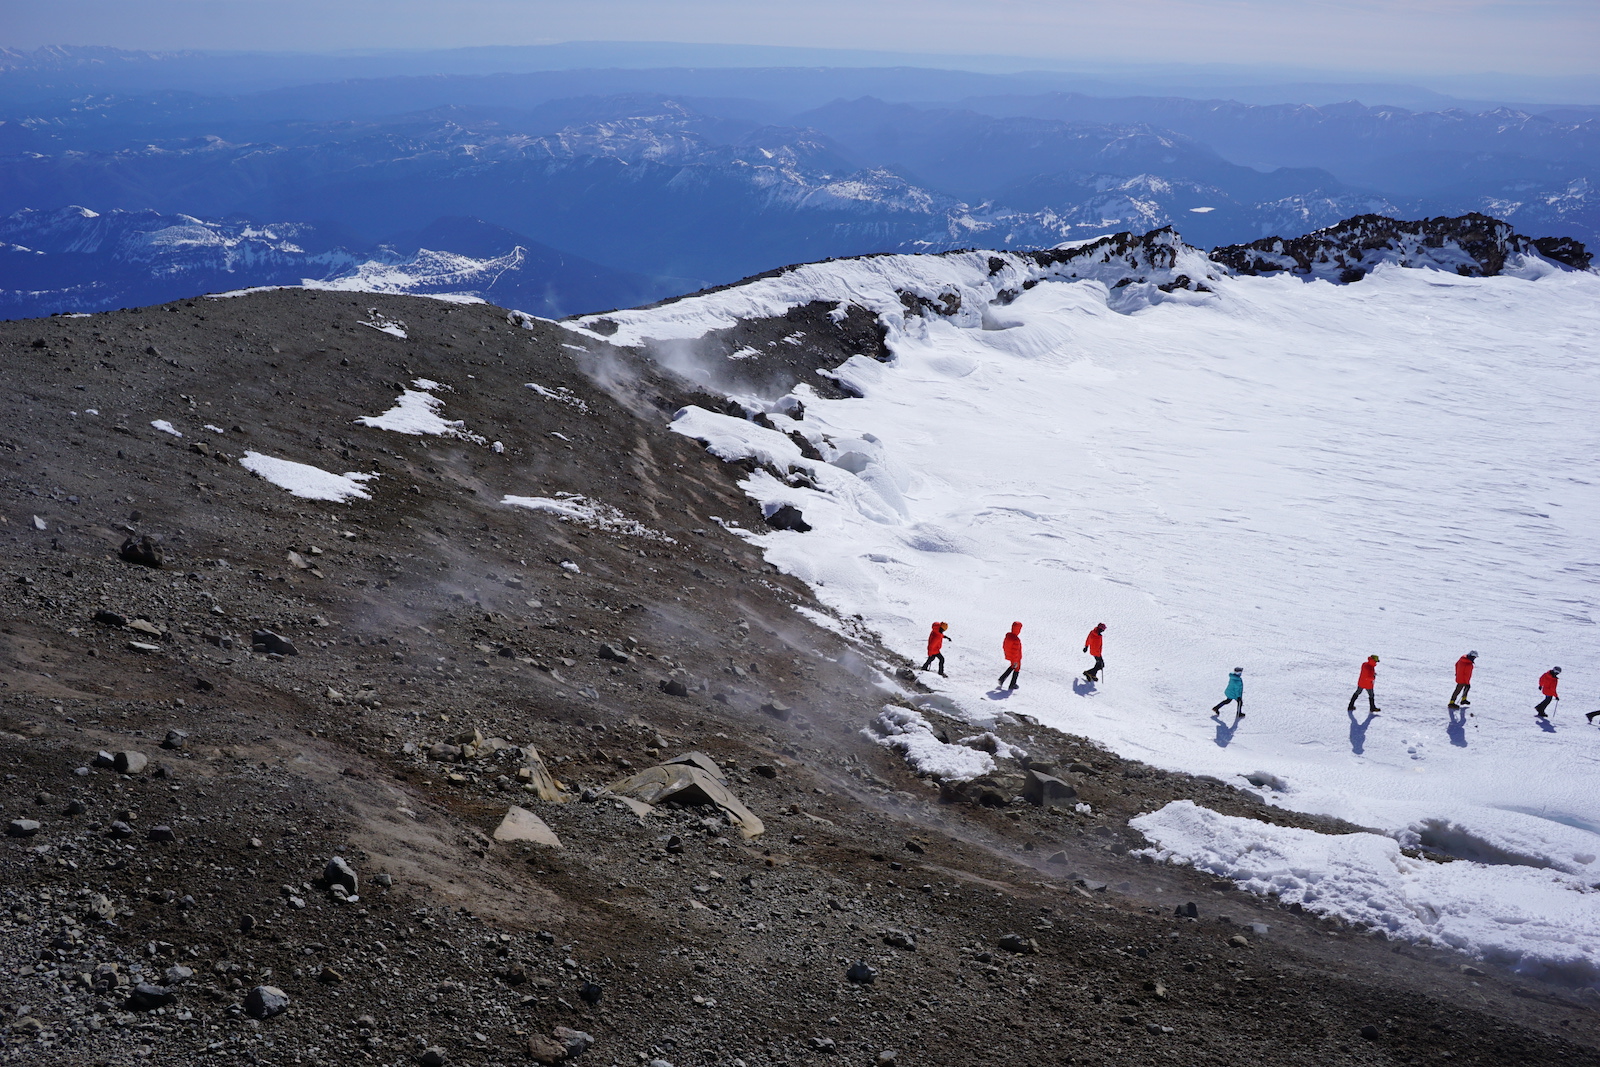 Climbers walking across the crater at the top of Mount Rainier